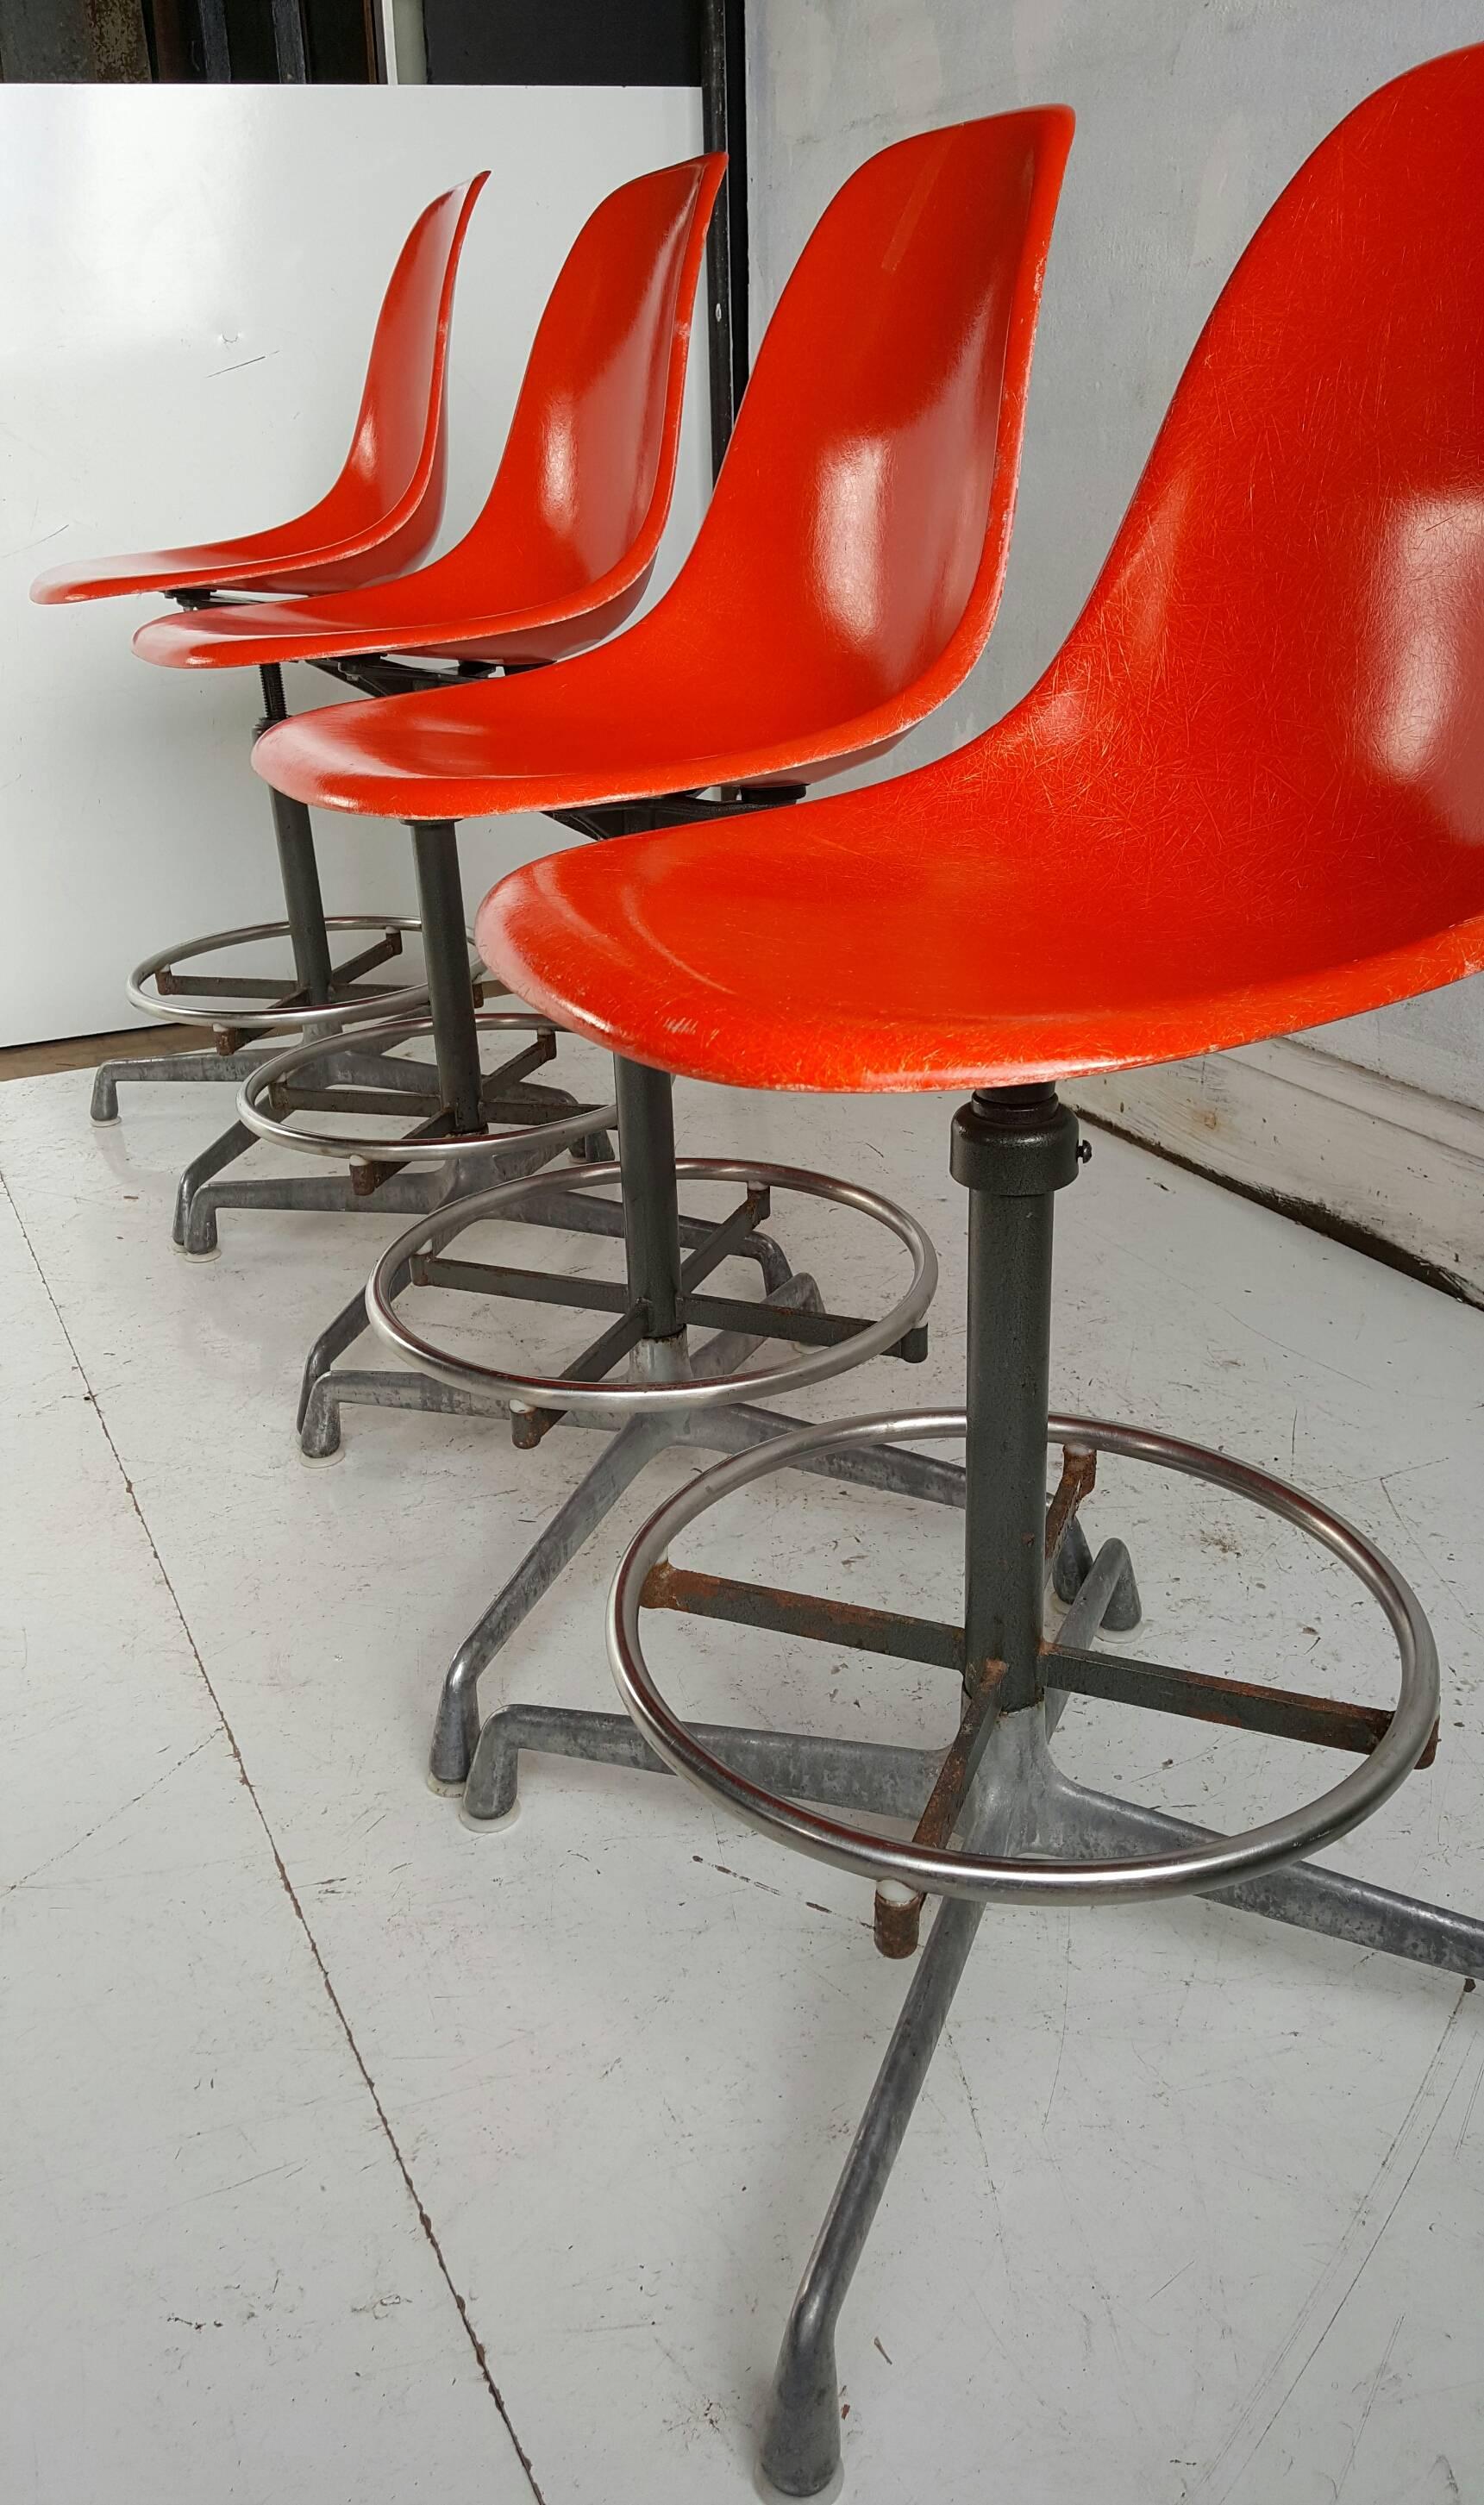 Nice set of four matching architectural adjustable drafting stool having a molded fiberglass seat and round foot rest floating on a four pronged cast aluminum base.